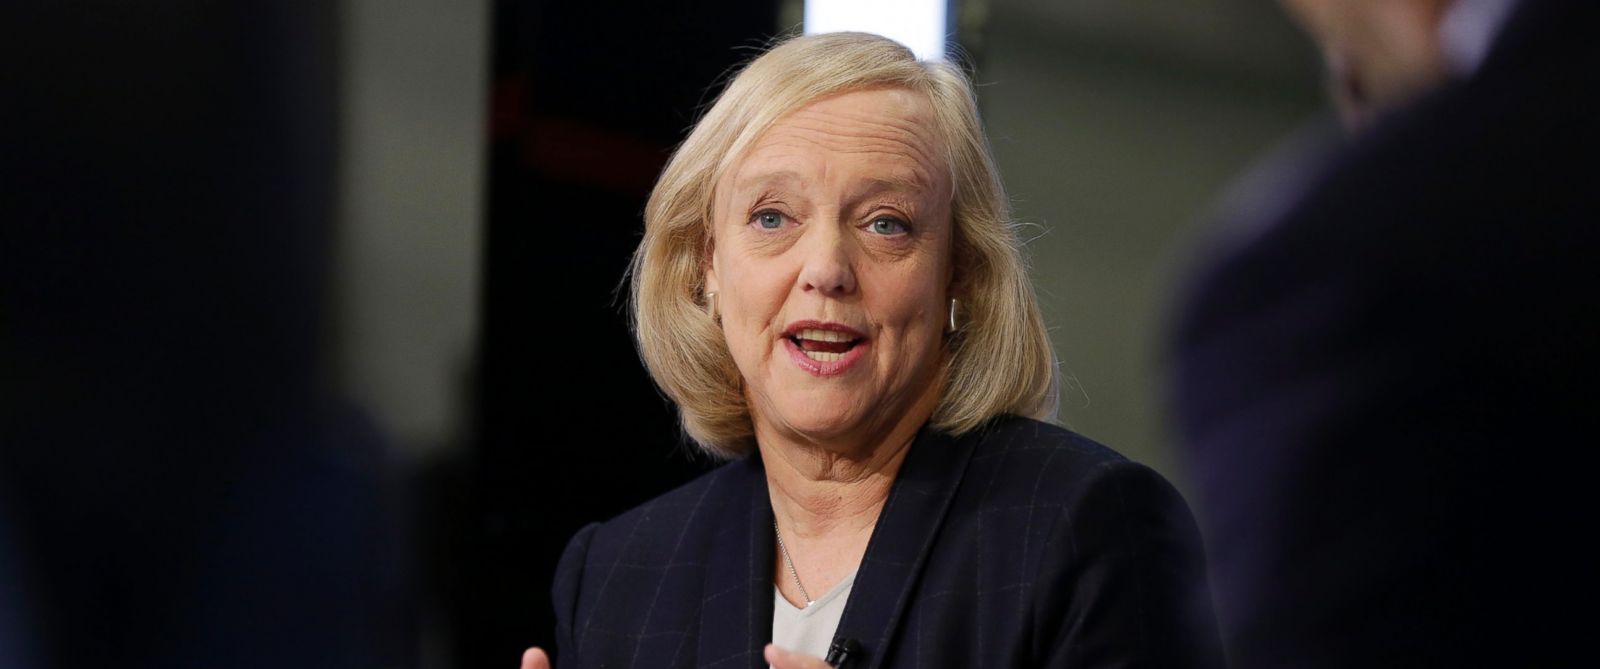 PHOTO: Hewlett Packard Enterprise President and Chief Executive Officer Meg Whitman is interviewed on the floor of the New York Stock Exchange, Monday, Nov. 2, 2015.